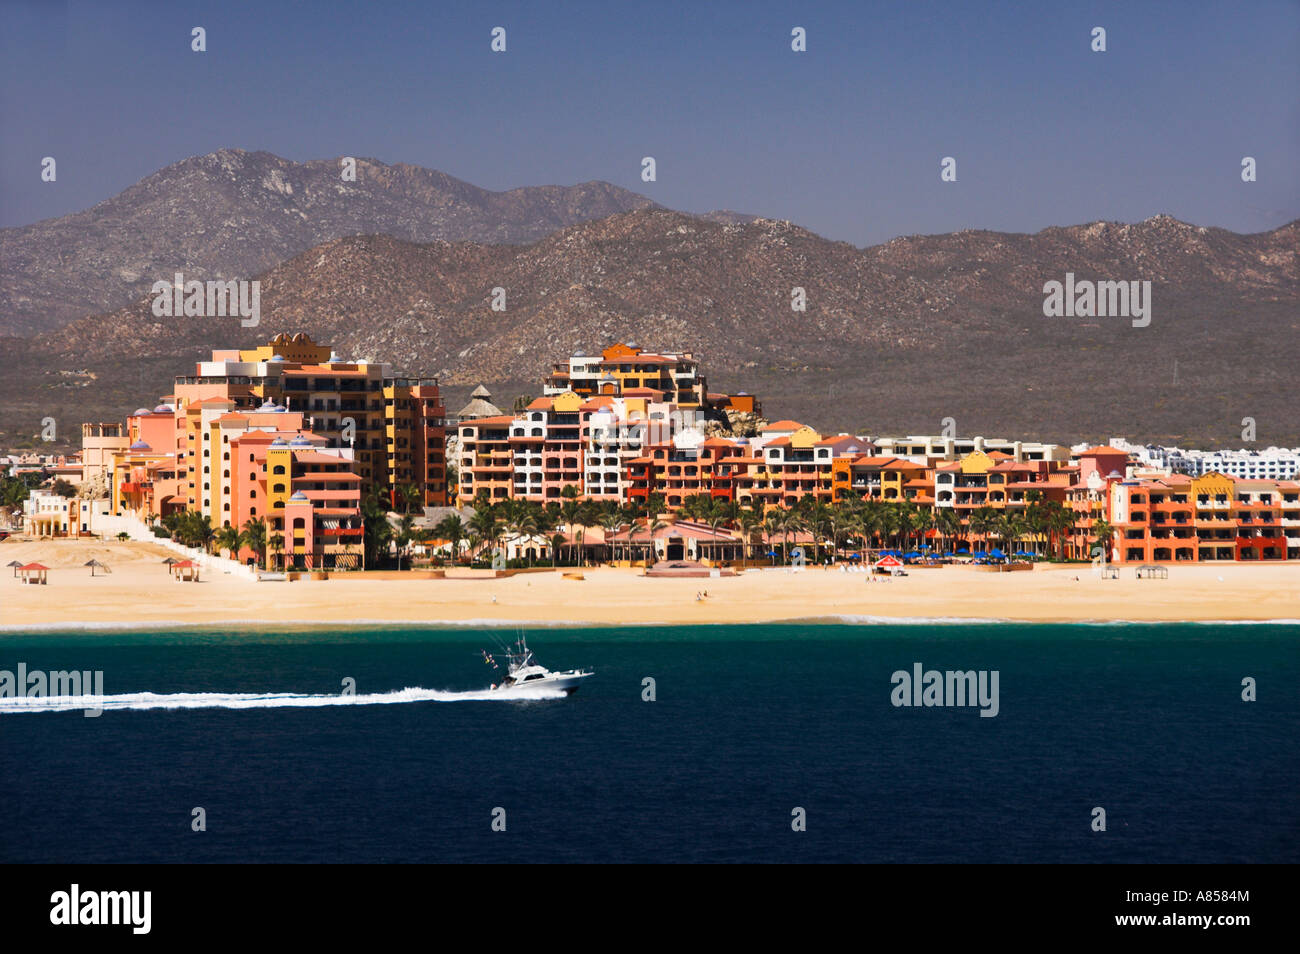 Housing complexes and condominiums at the resort of Cabo San Lucas Mexico Stock Photo